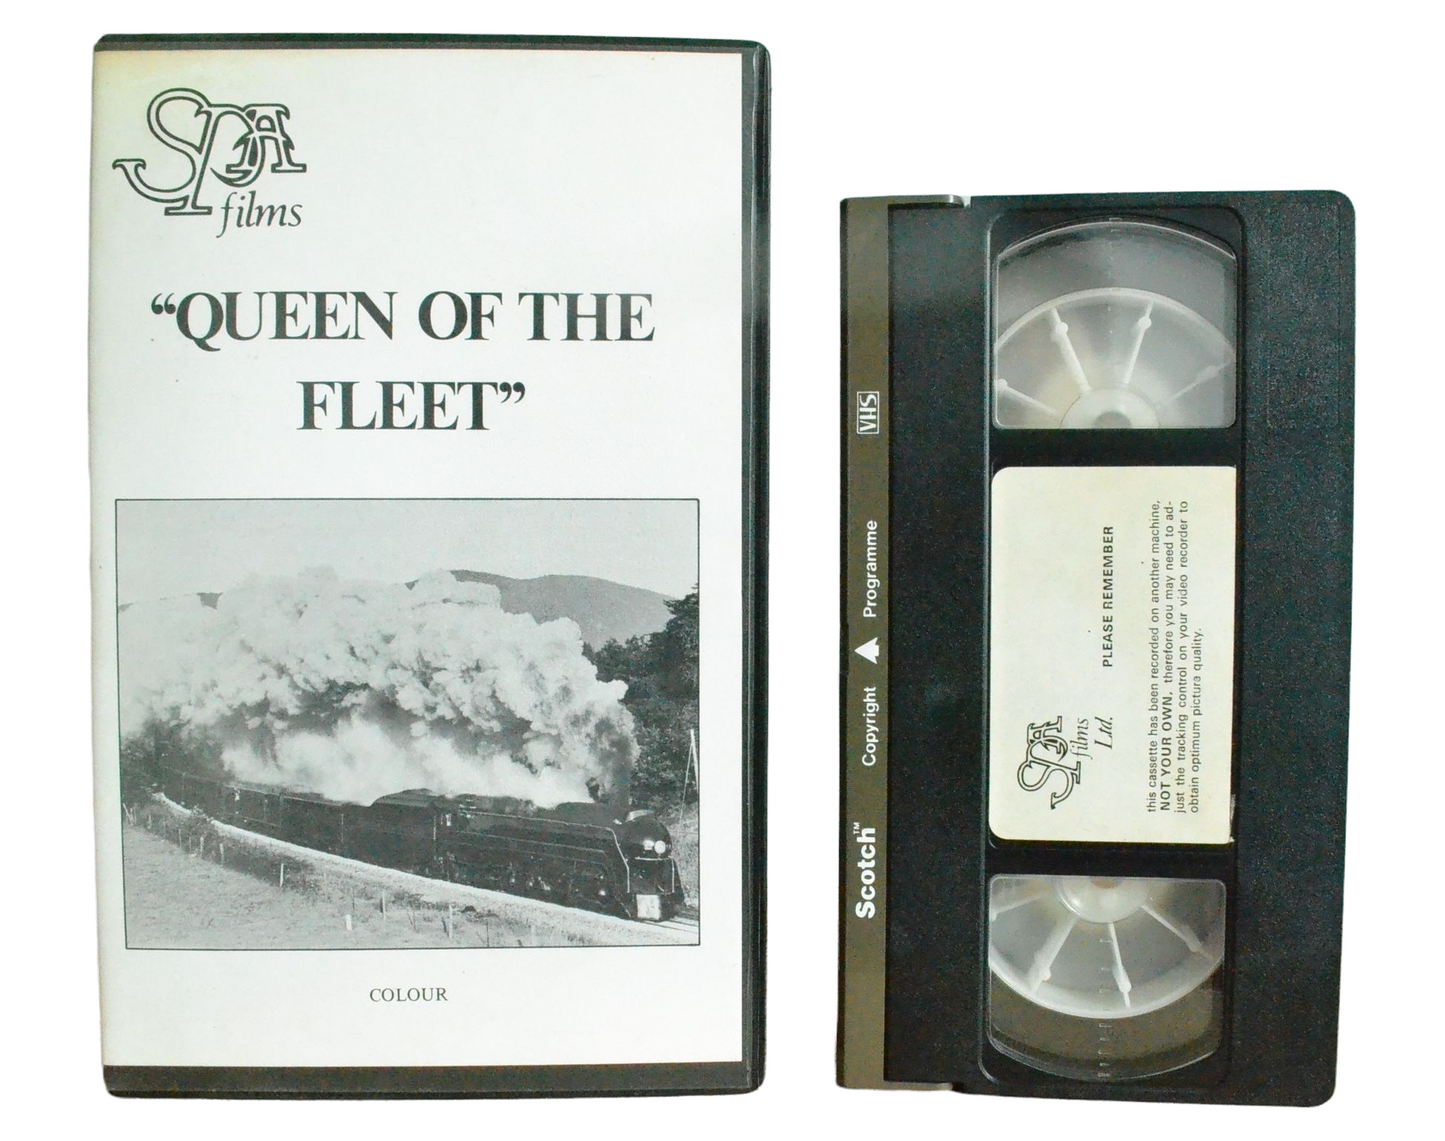 Queen of The Fleet - SPA Films - Vintage - Pal VHS-